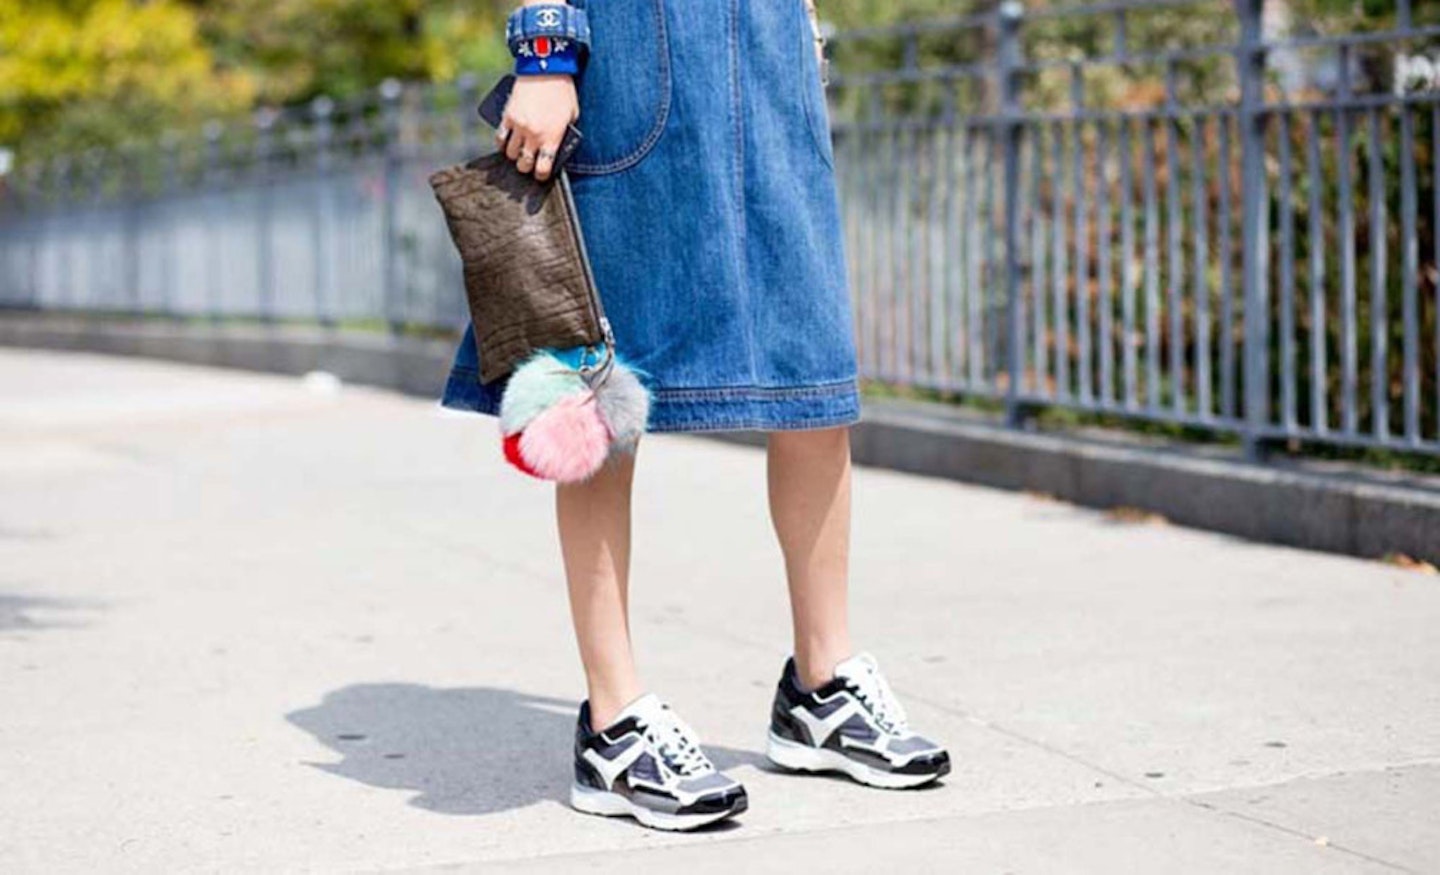 The best flats on the streets of Fashion Week>>>